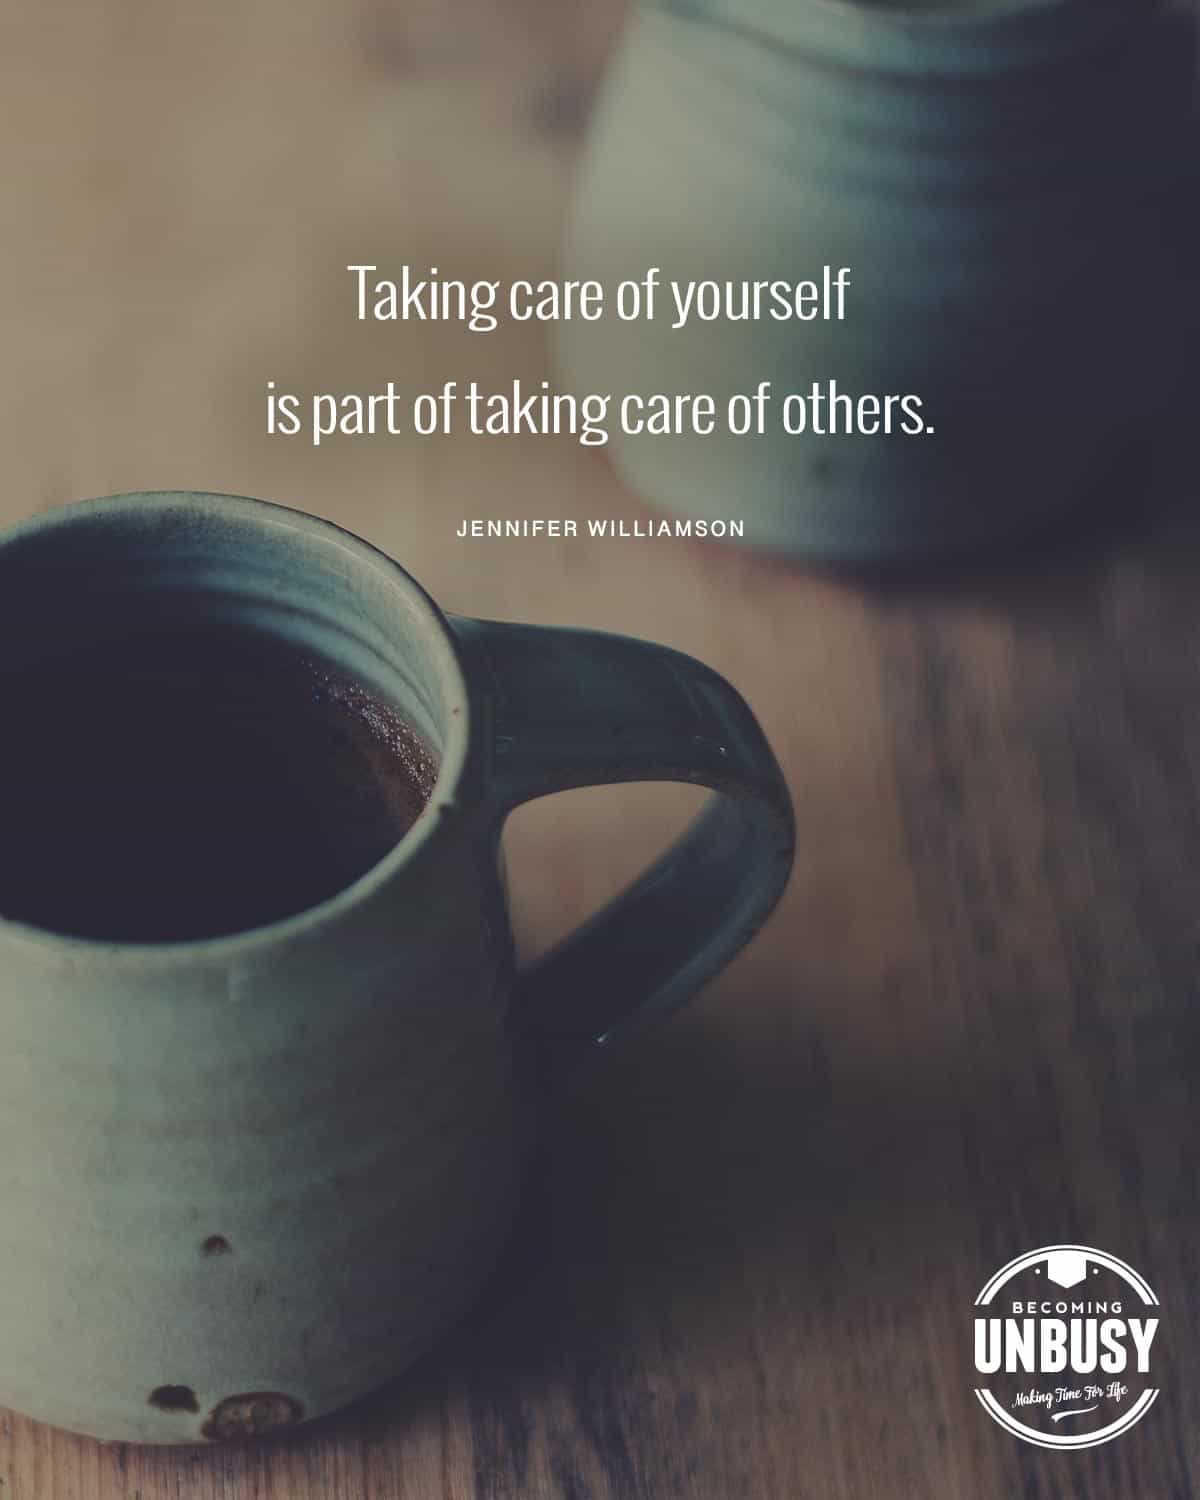 Two artsy coffee mugs at a table with a self-care quote from Jennifer Williamson over top, which reads, "Taking care of yourself is part of taking care of others."